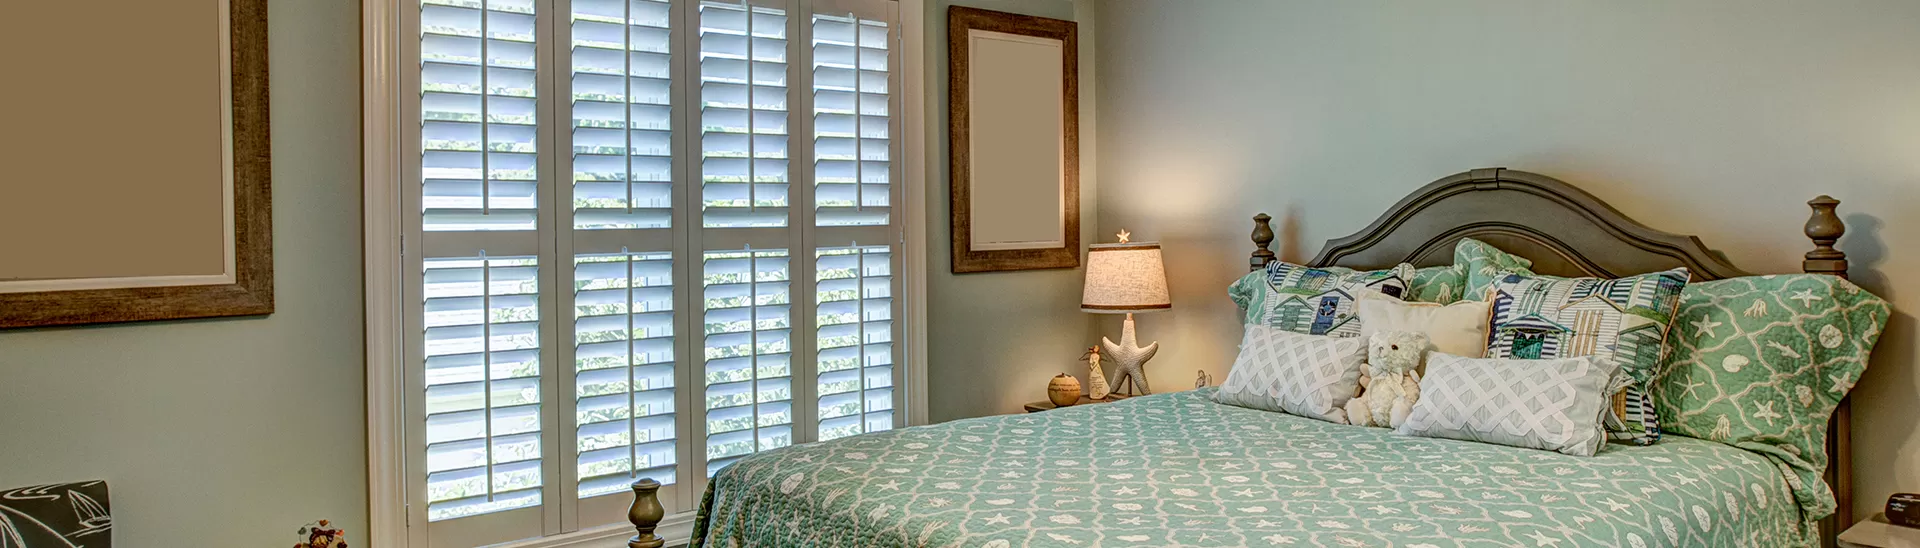 Tips to Paint and Turn Your Guest Bedroom into a Retreat 